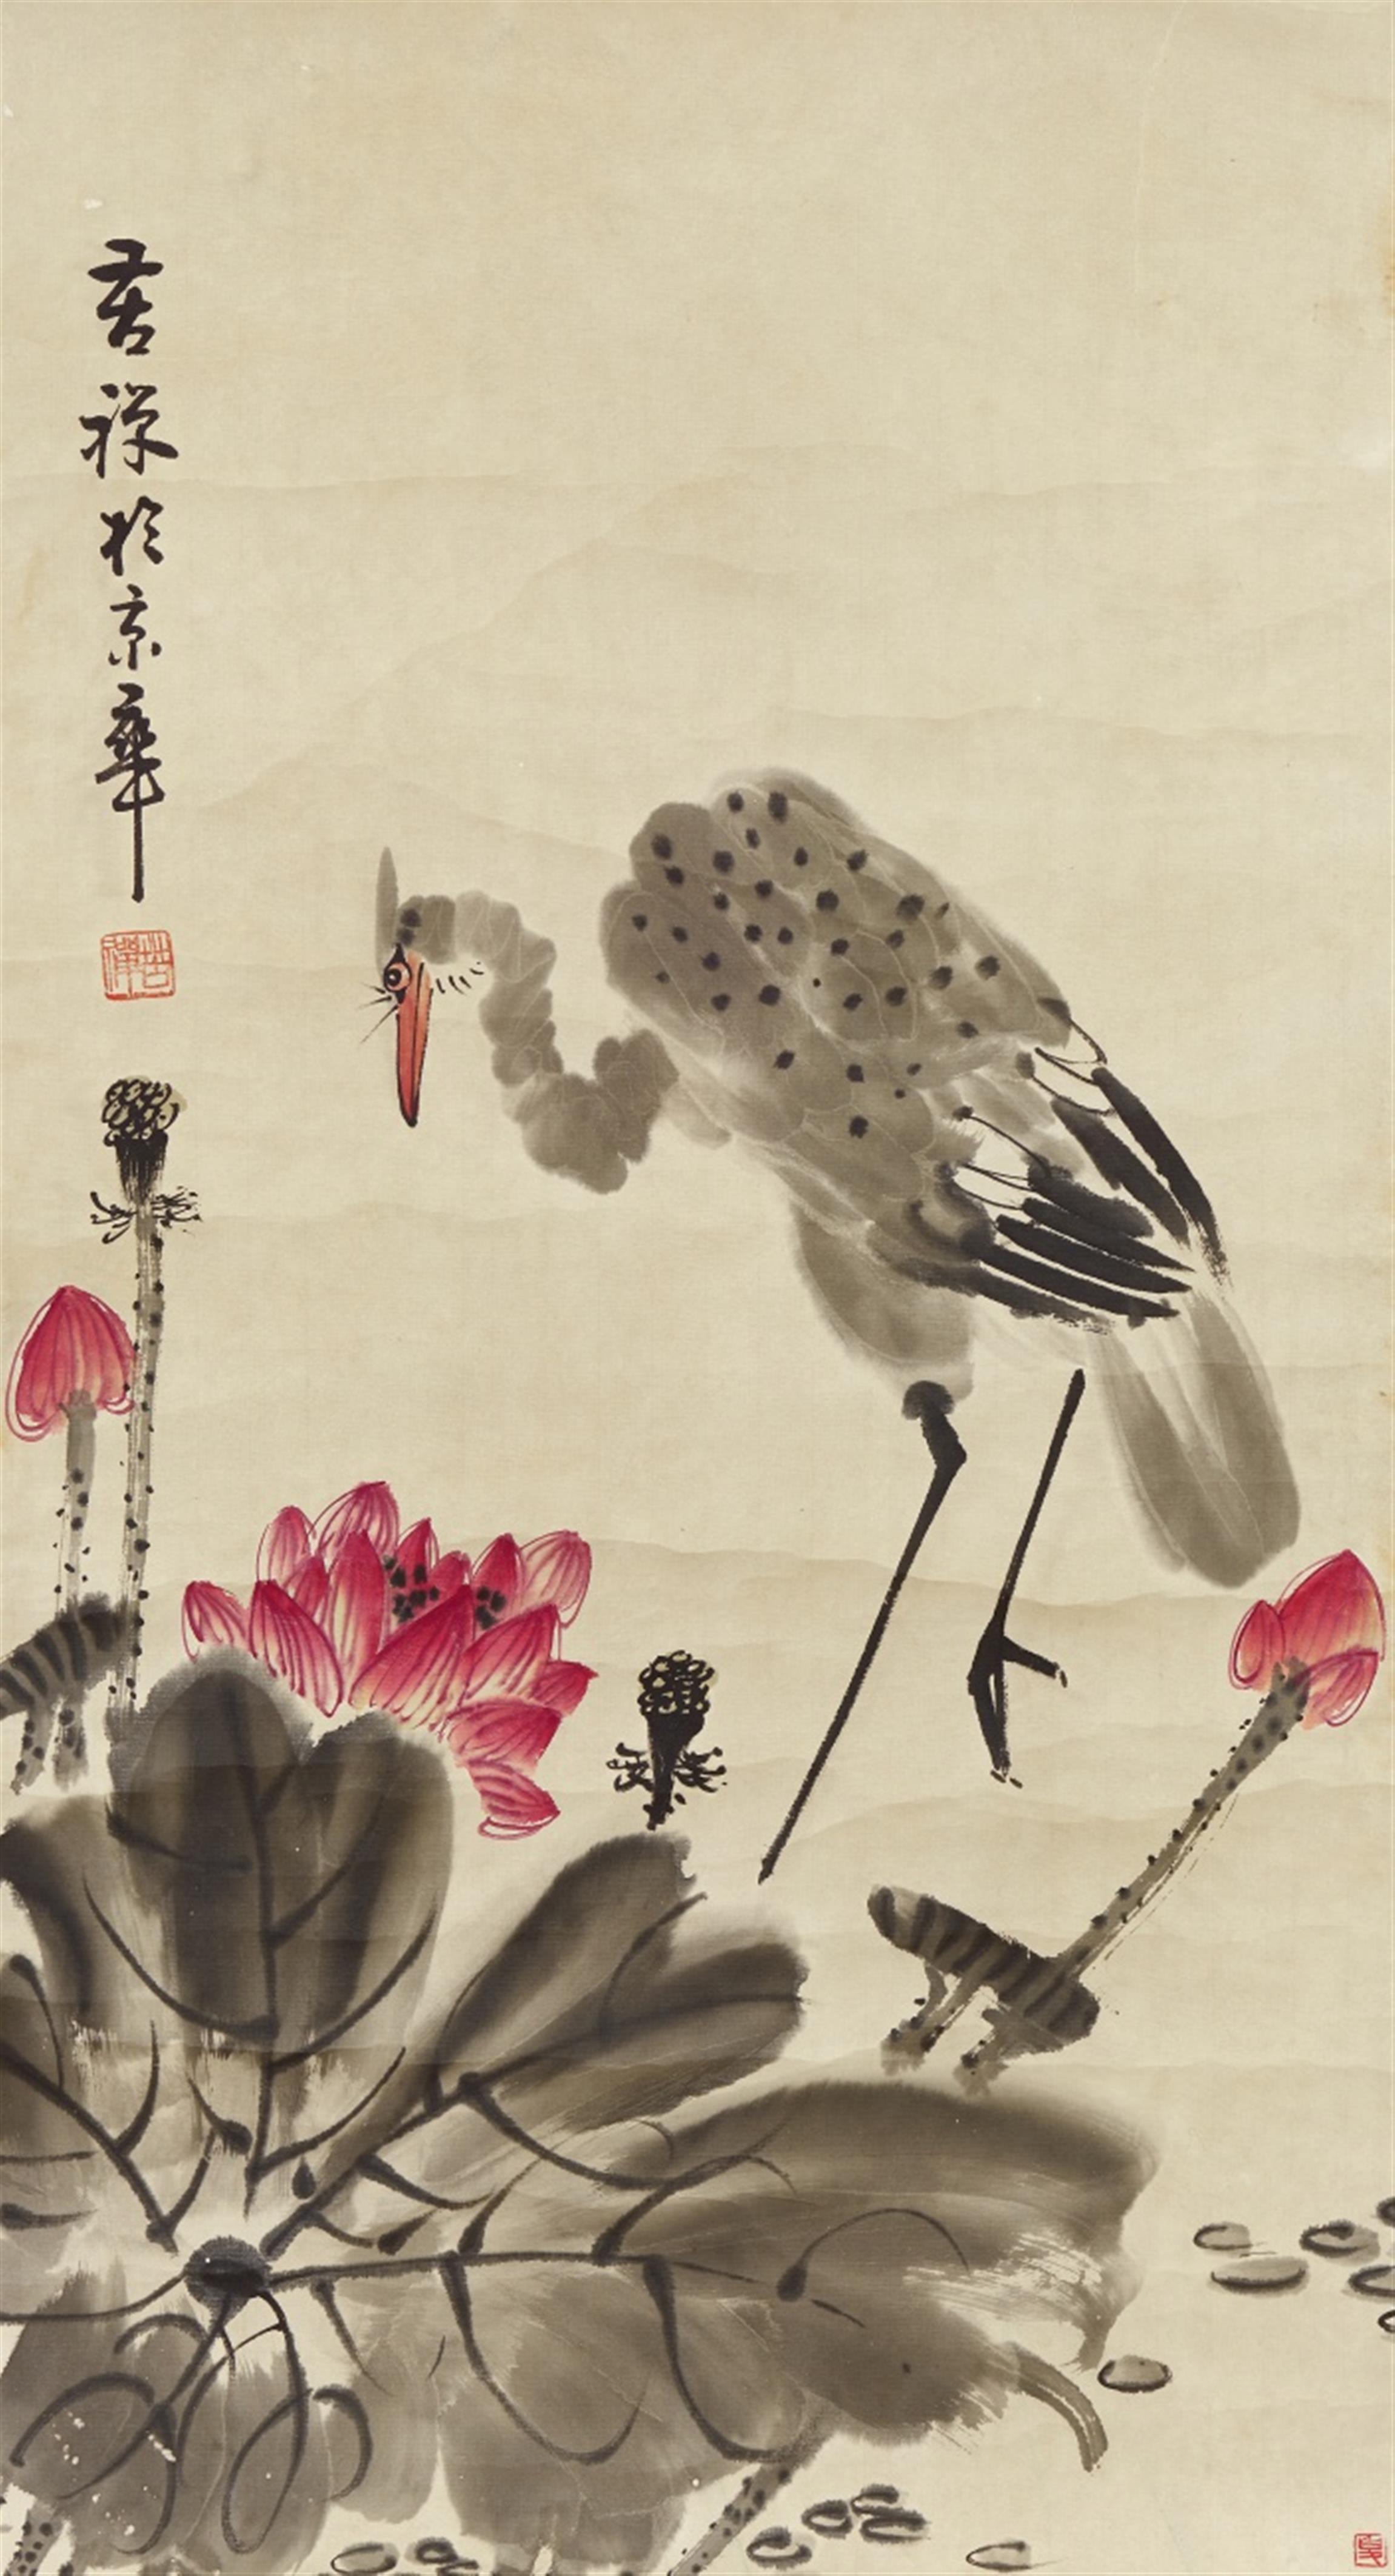 Li Kuchan, attributed to - A heron in a lotus pond. Hanging scroll. Ink and colour on paper. Inscribed and sealed Kuchan and the collector's seal Xia (seal of the German collector Jerg Haas). - image-1